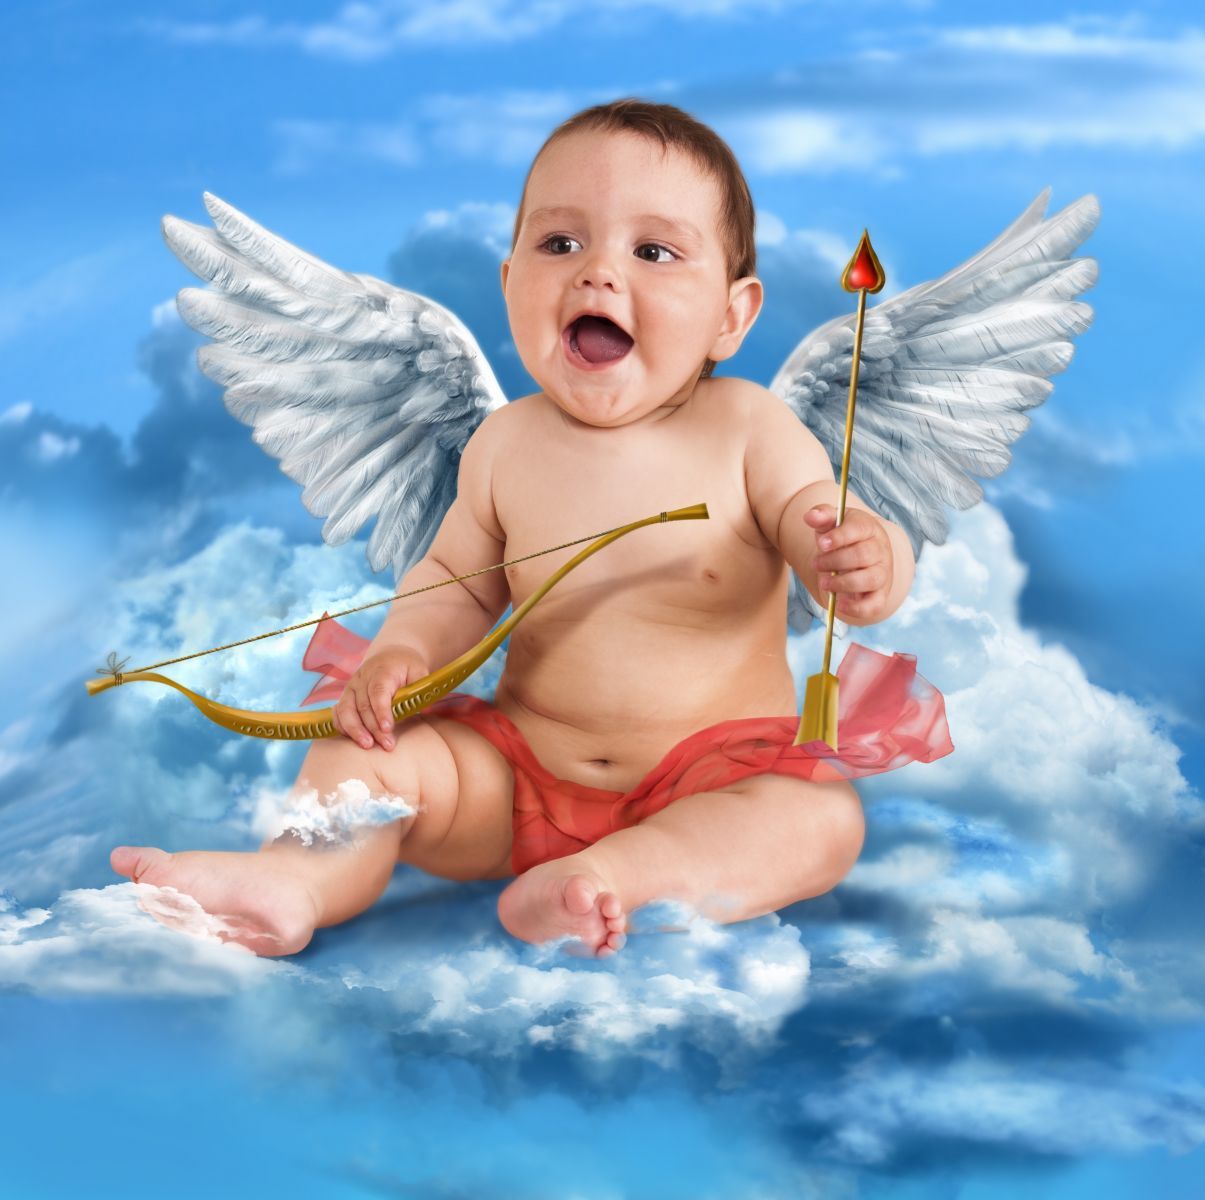 Baby Cupid Love. HD Cute Wallpaper for Mobile and Desktop